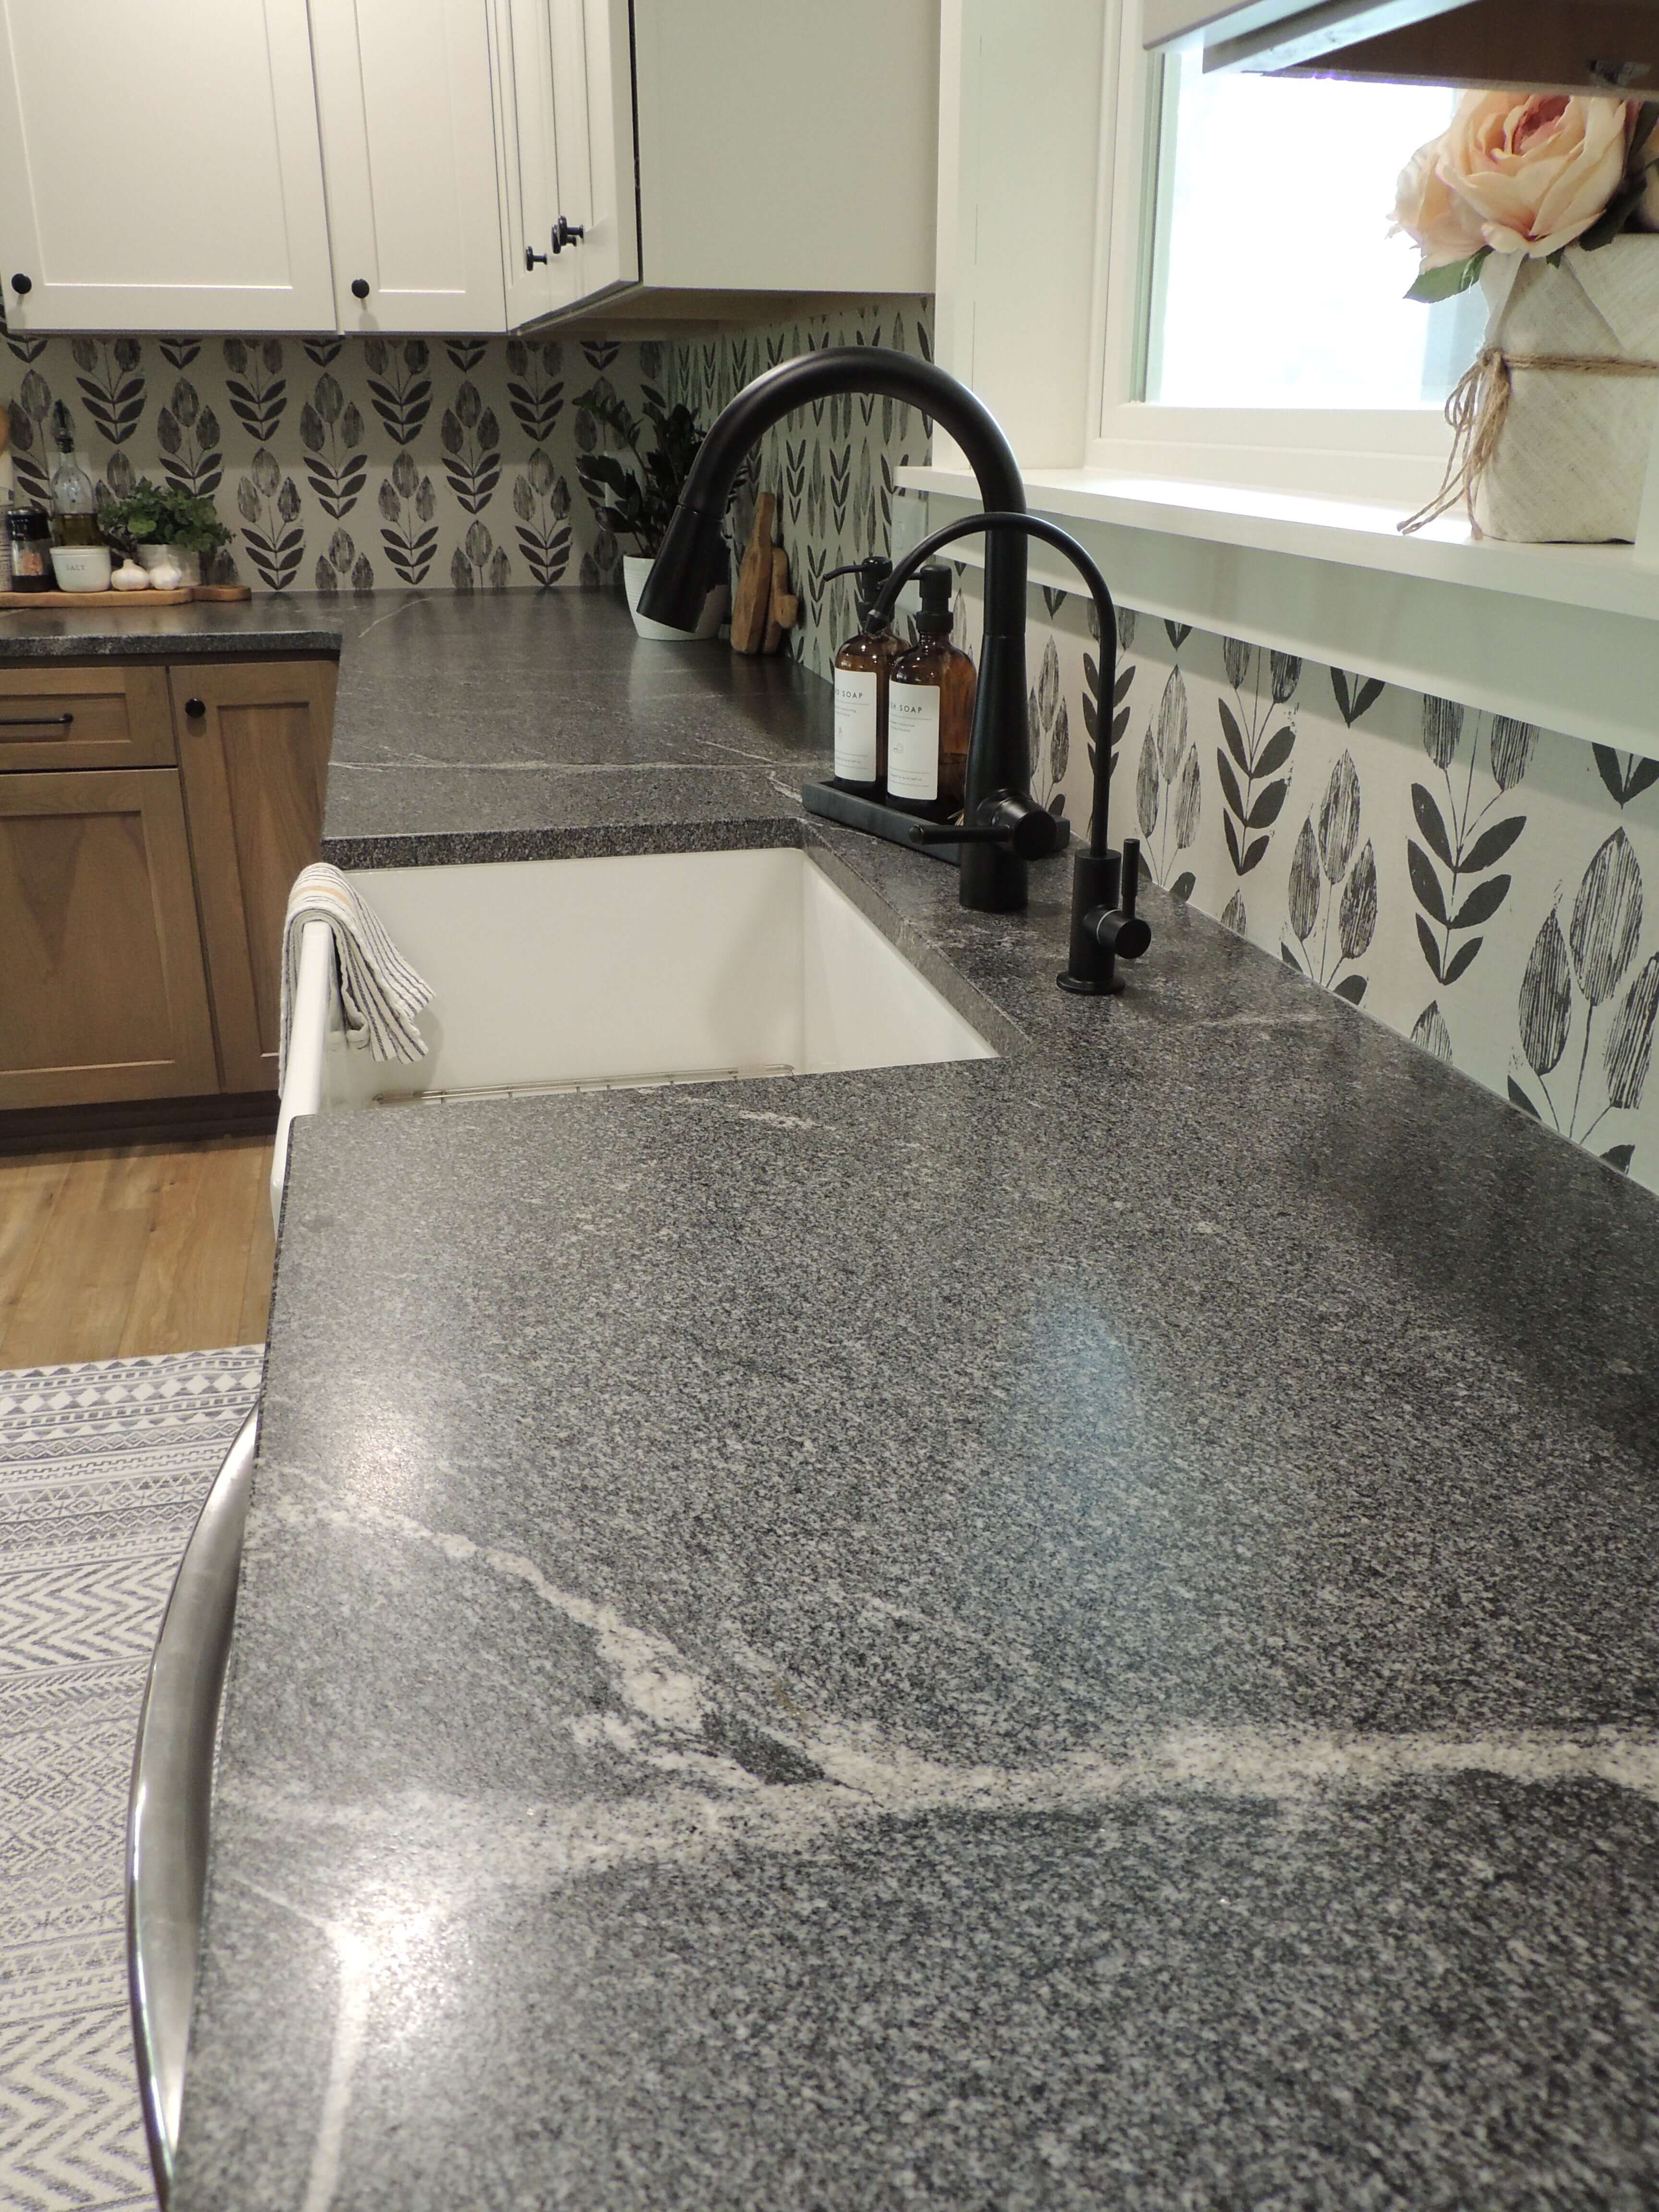 A close up of the Honed Granite countertops near the kitchen sink.